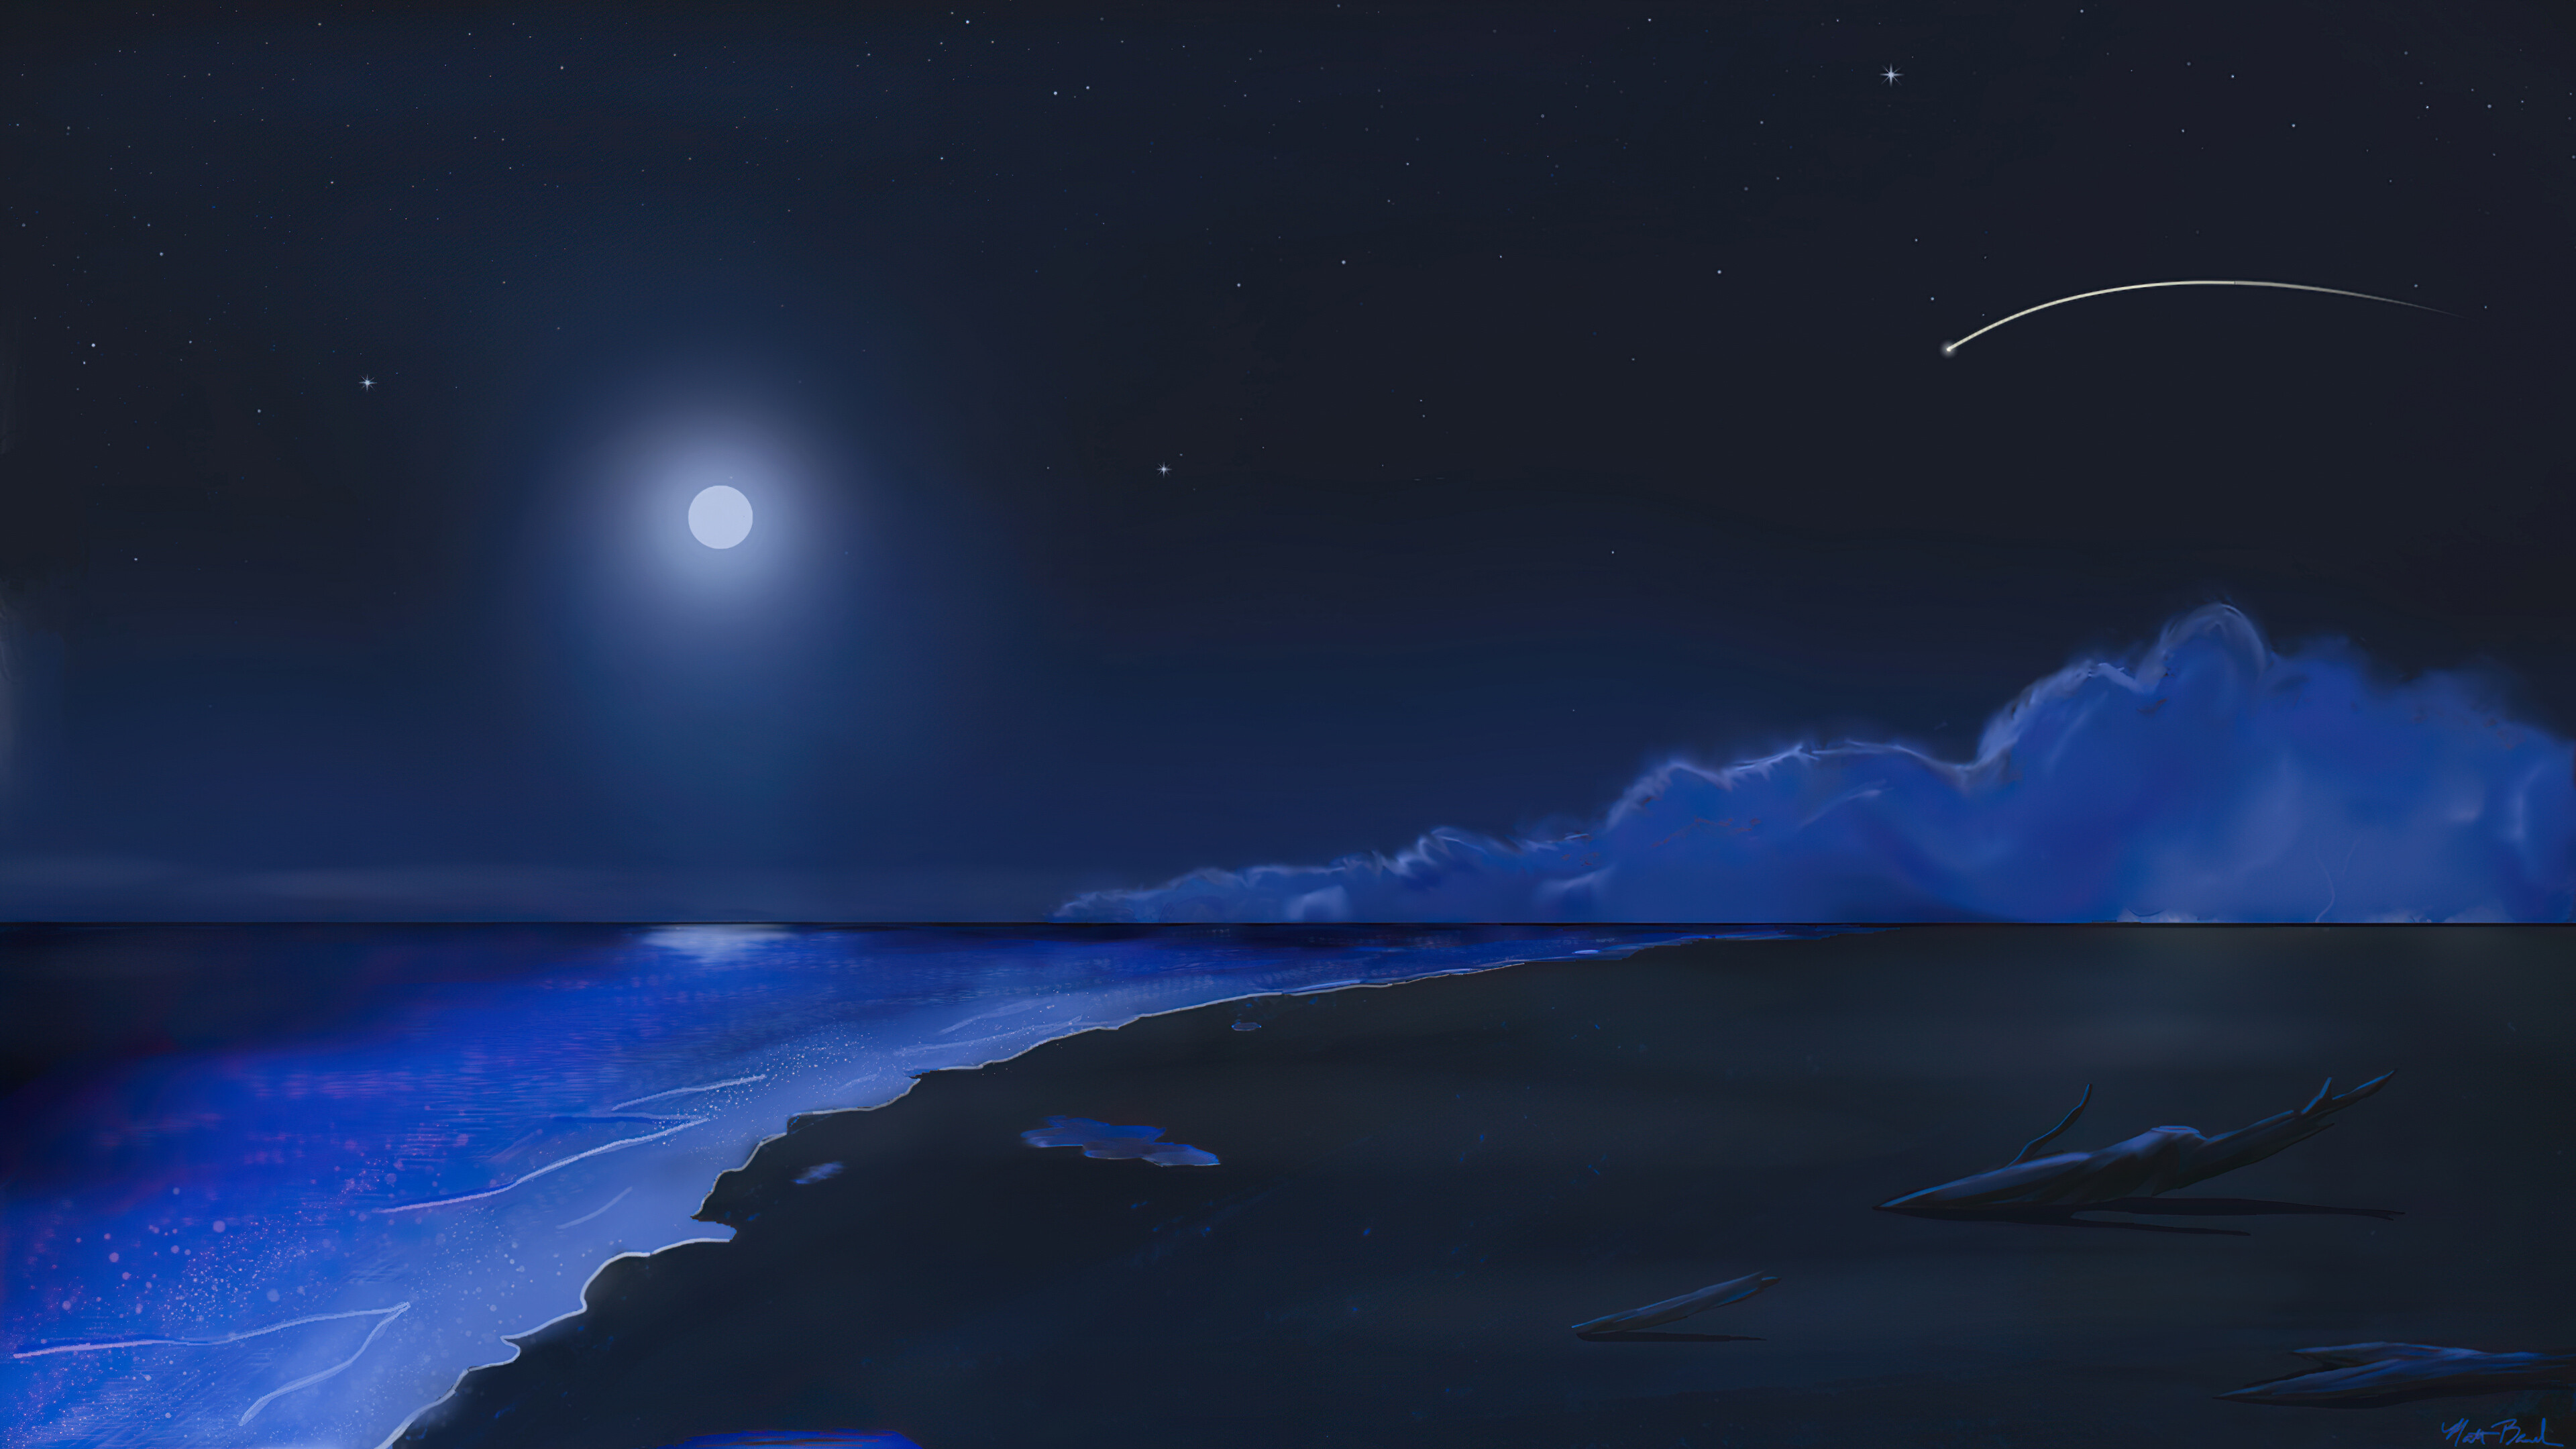 Sky at night with a full moon (Anime Background) | Anime background, Night  scenery, Anime scenery wallpaper